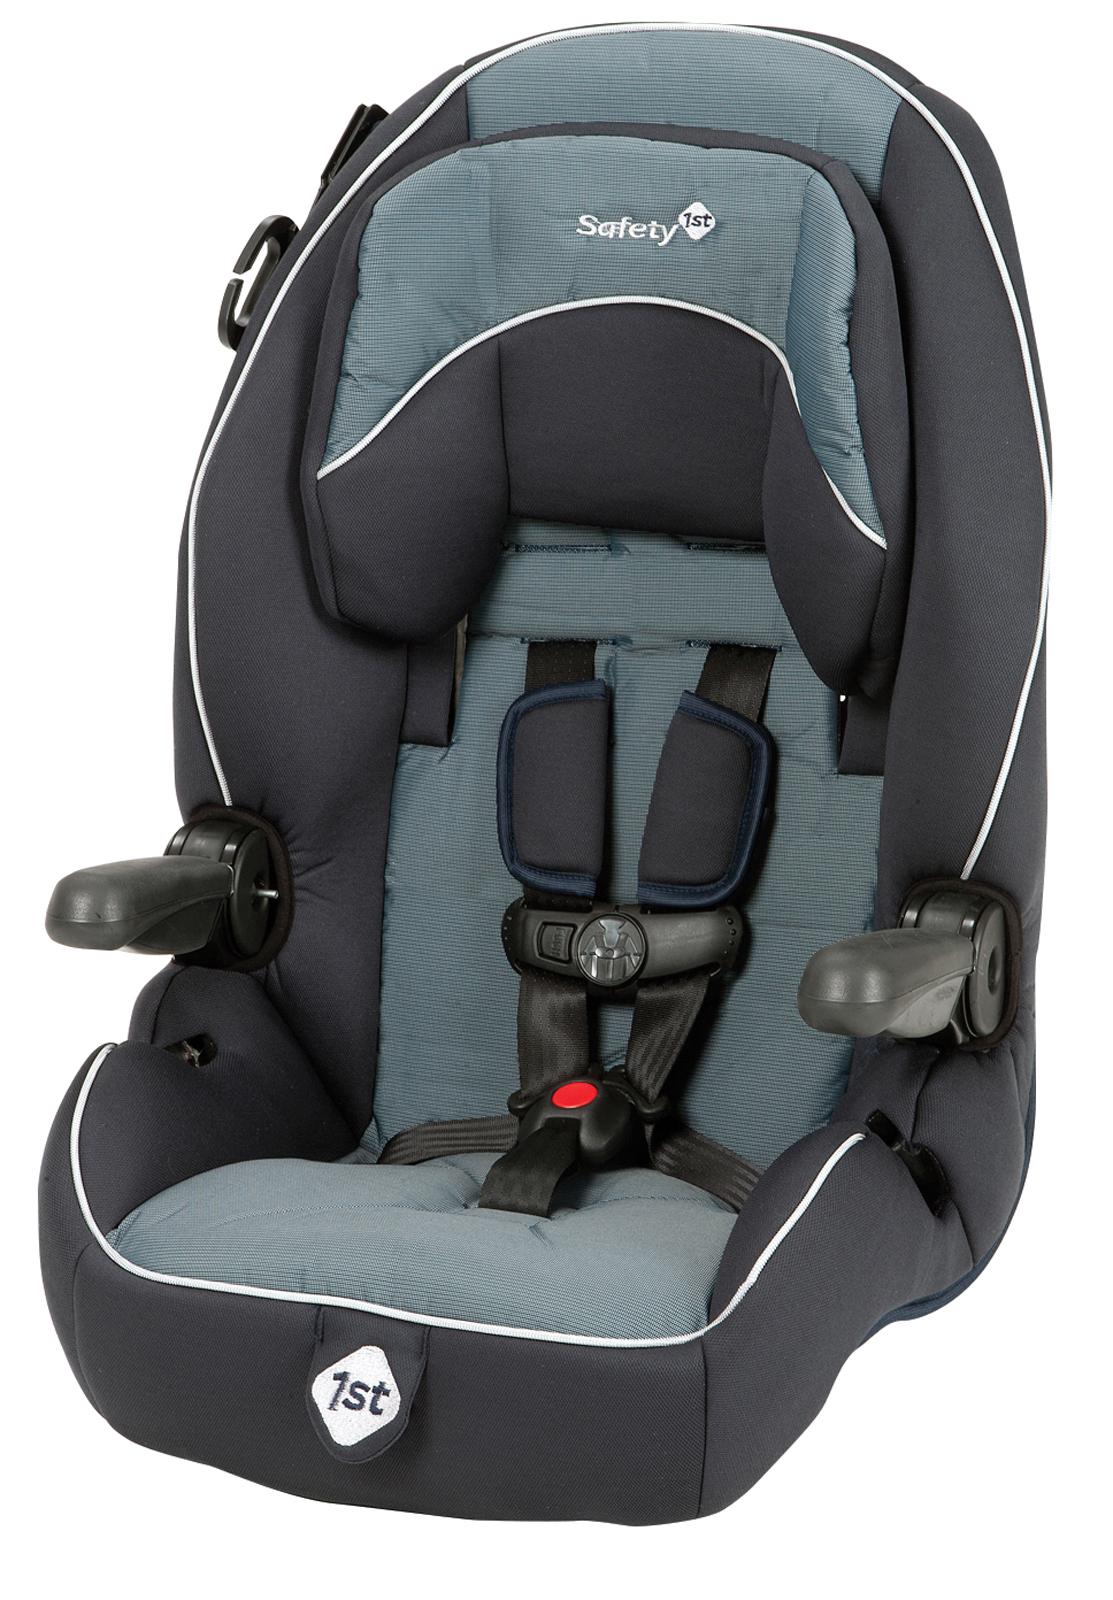 Safety 1st Summit Booster Car Seat - Seaport